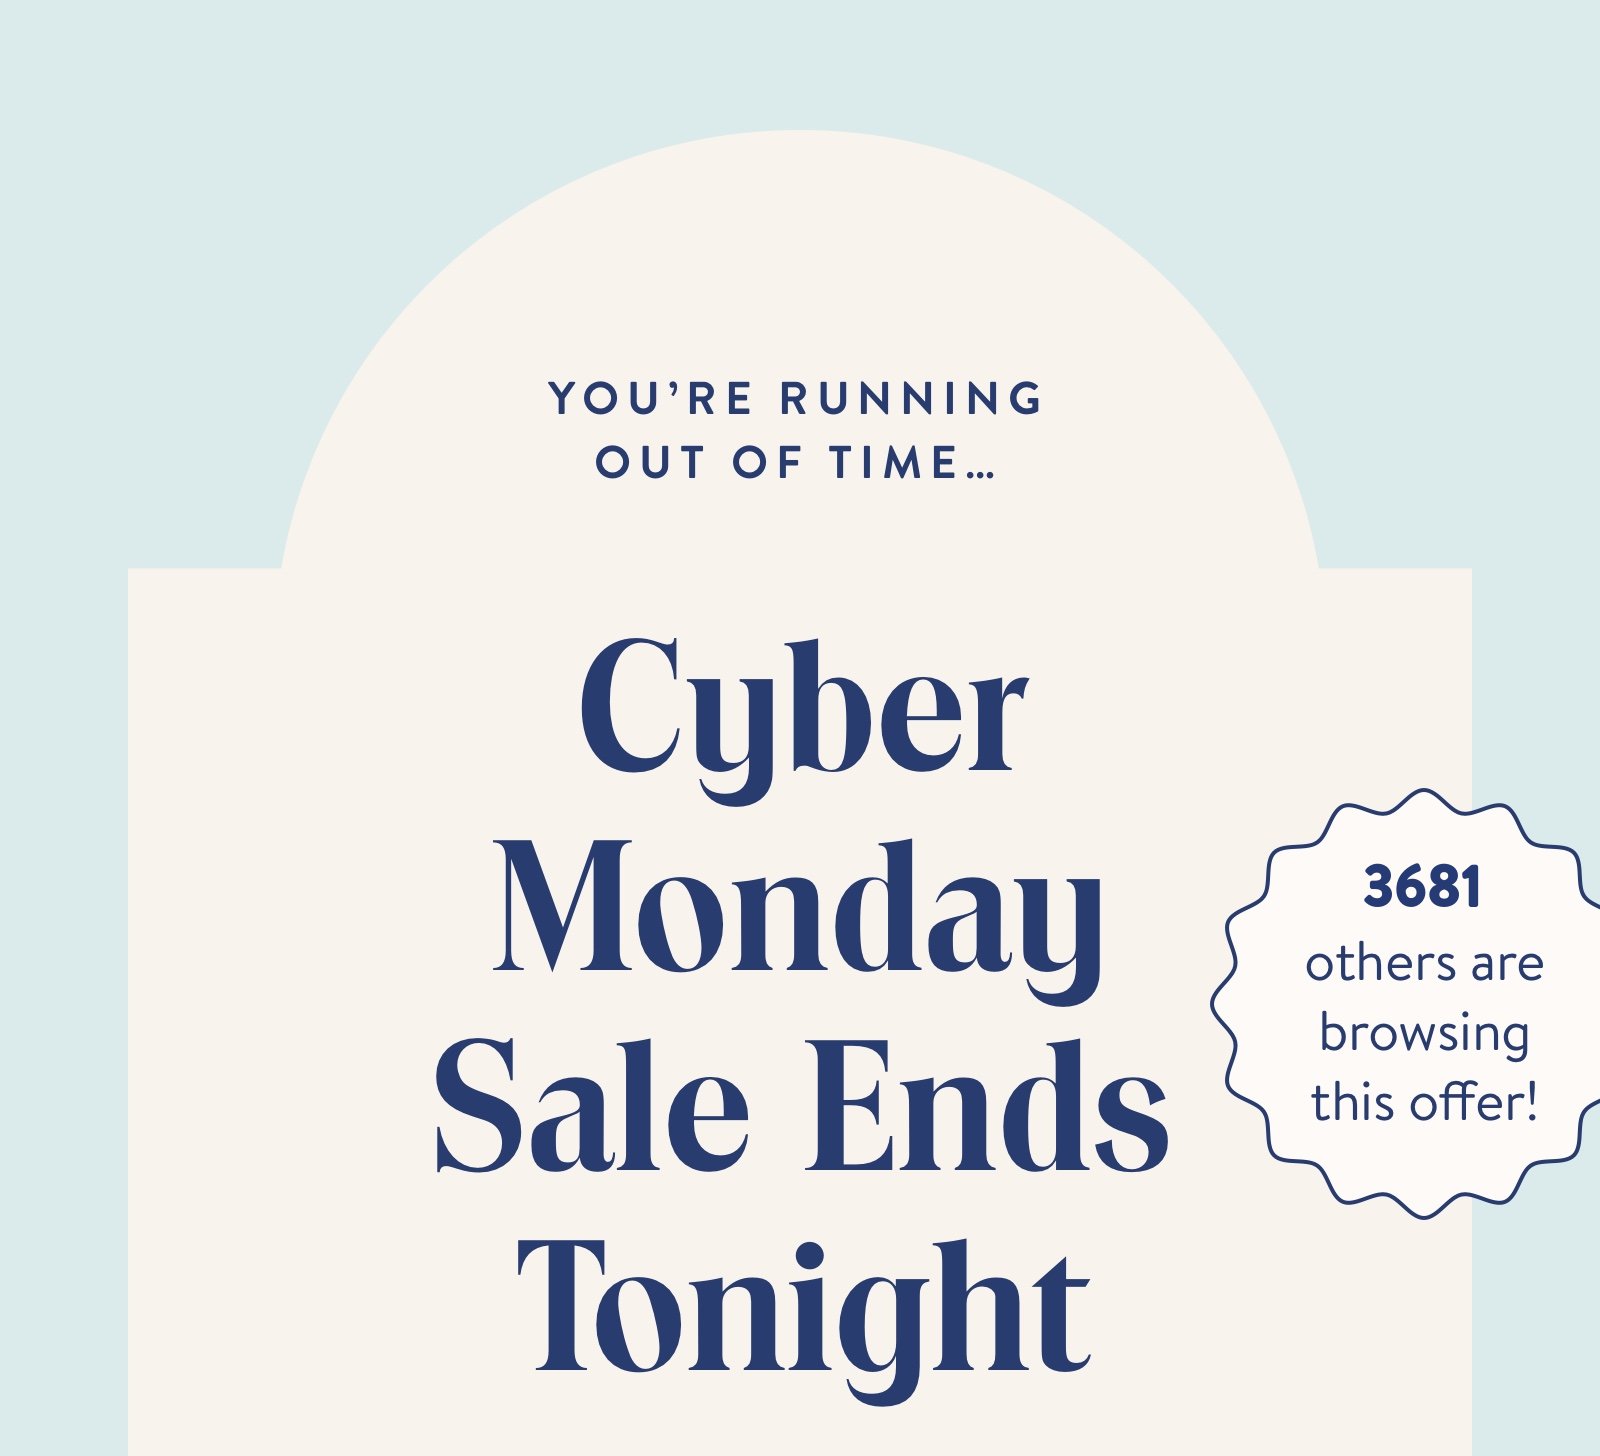 Cyber Monday Sale Ends Tonight